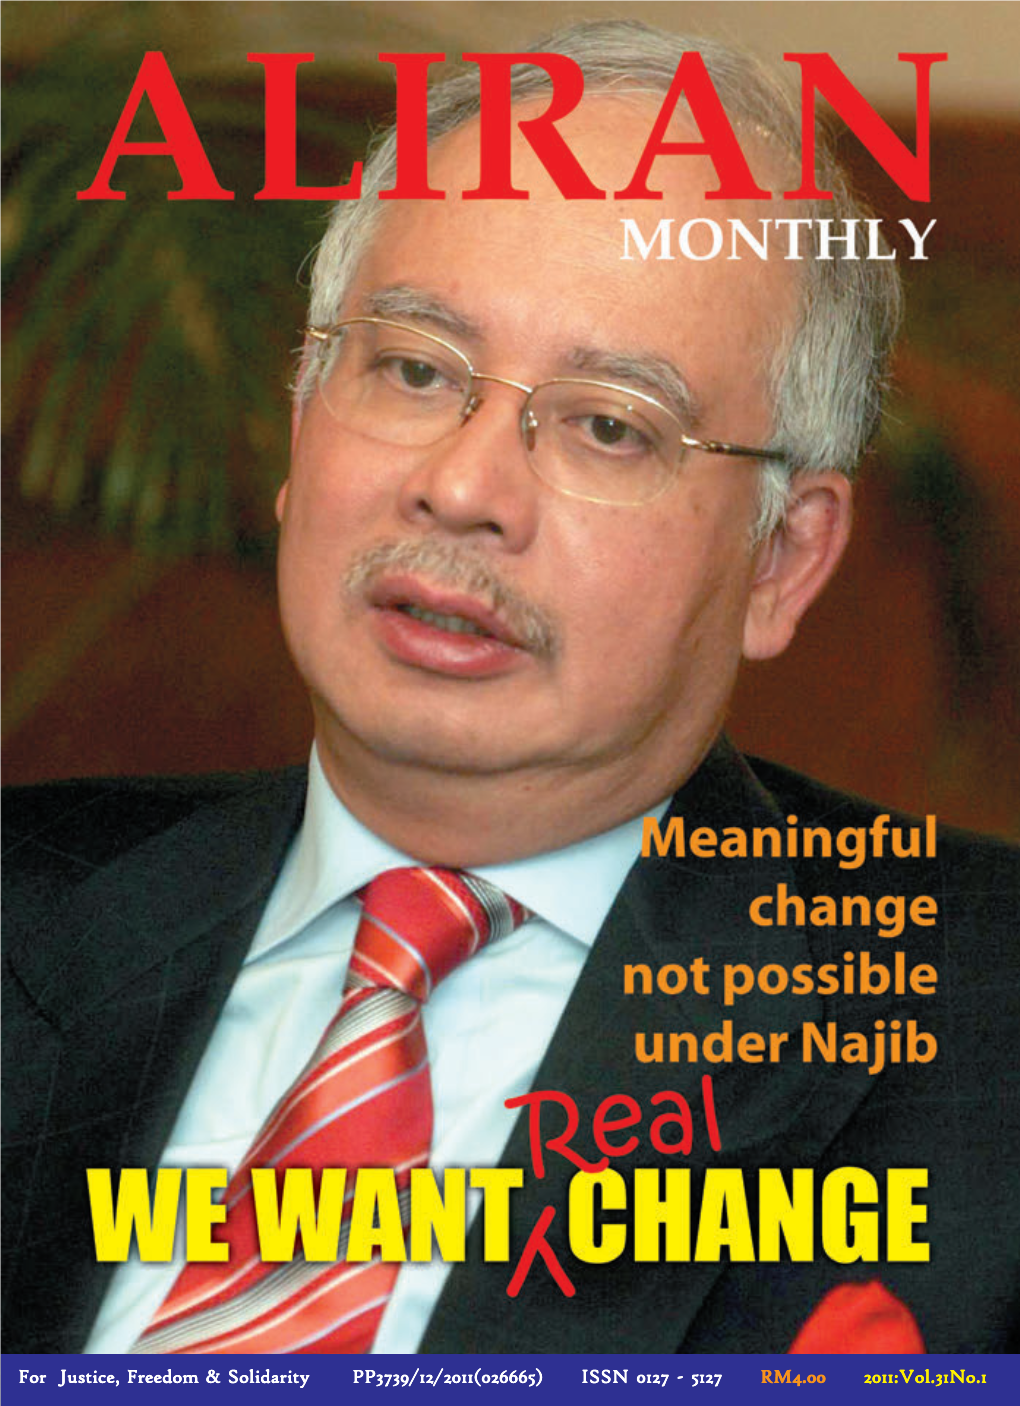 5127 RM4.00 2011:Vol.31No.1 For